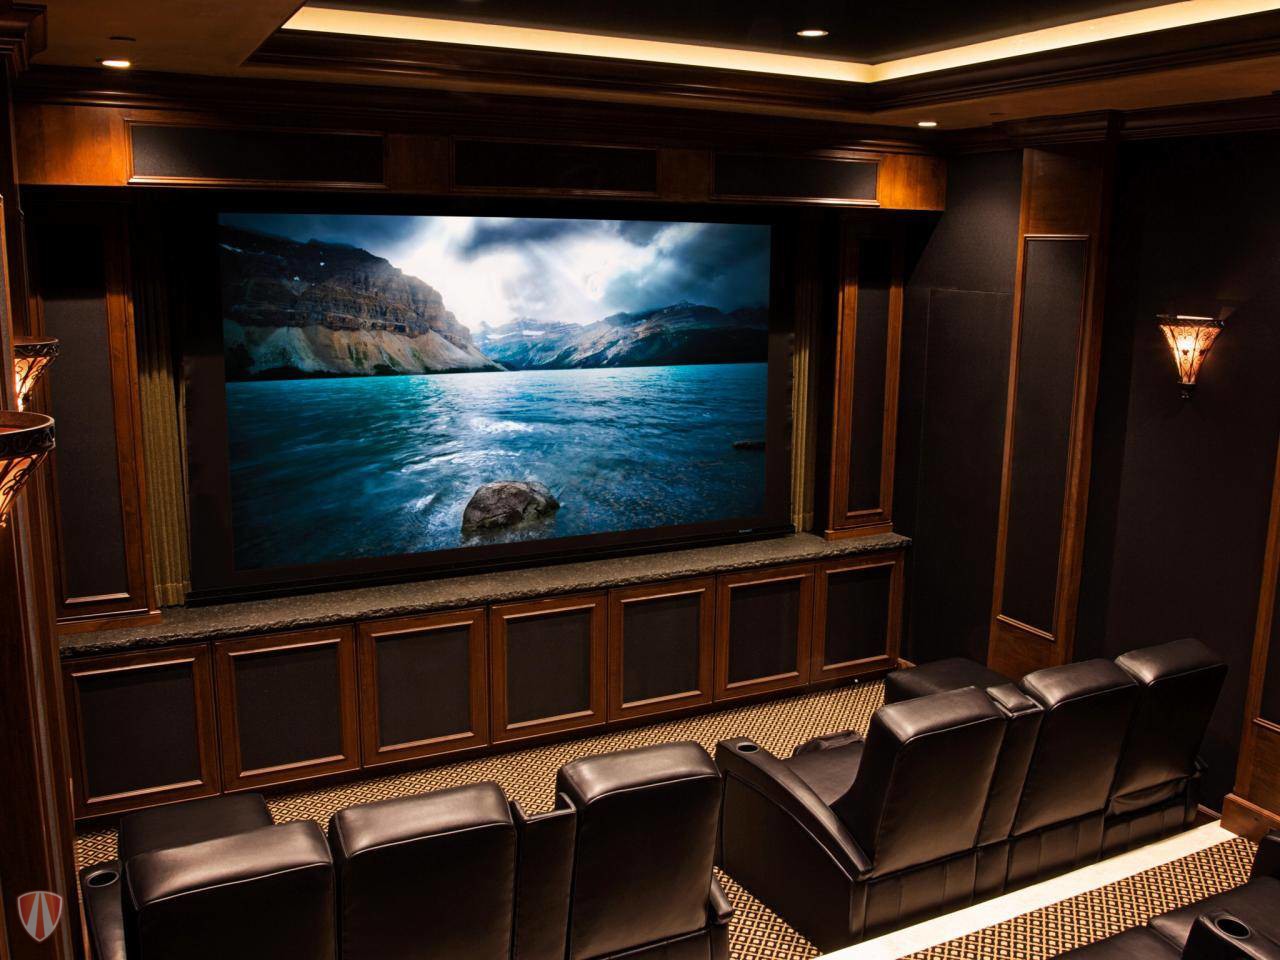 best projector screens for home theater